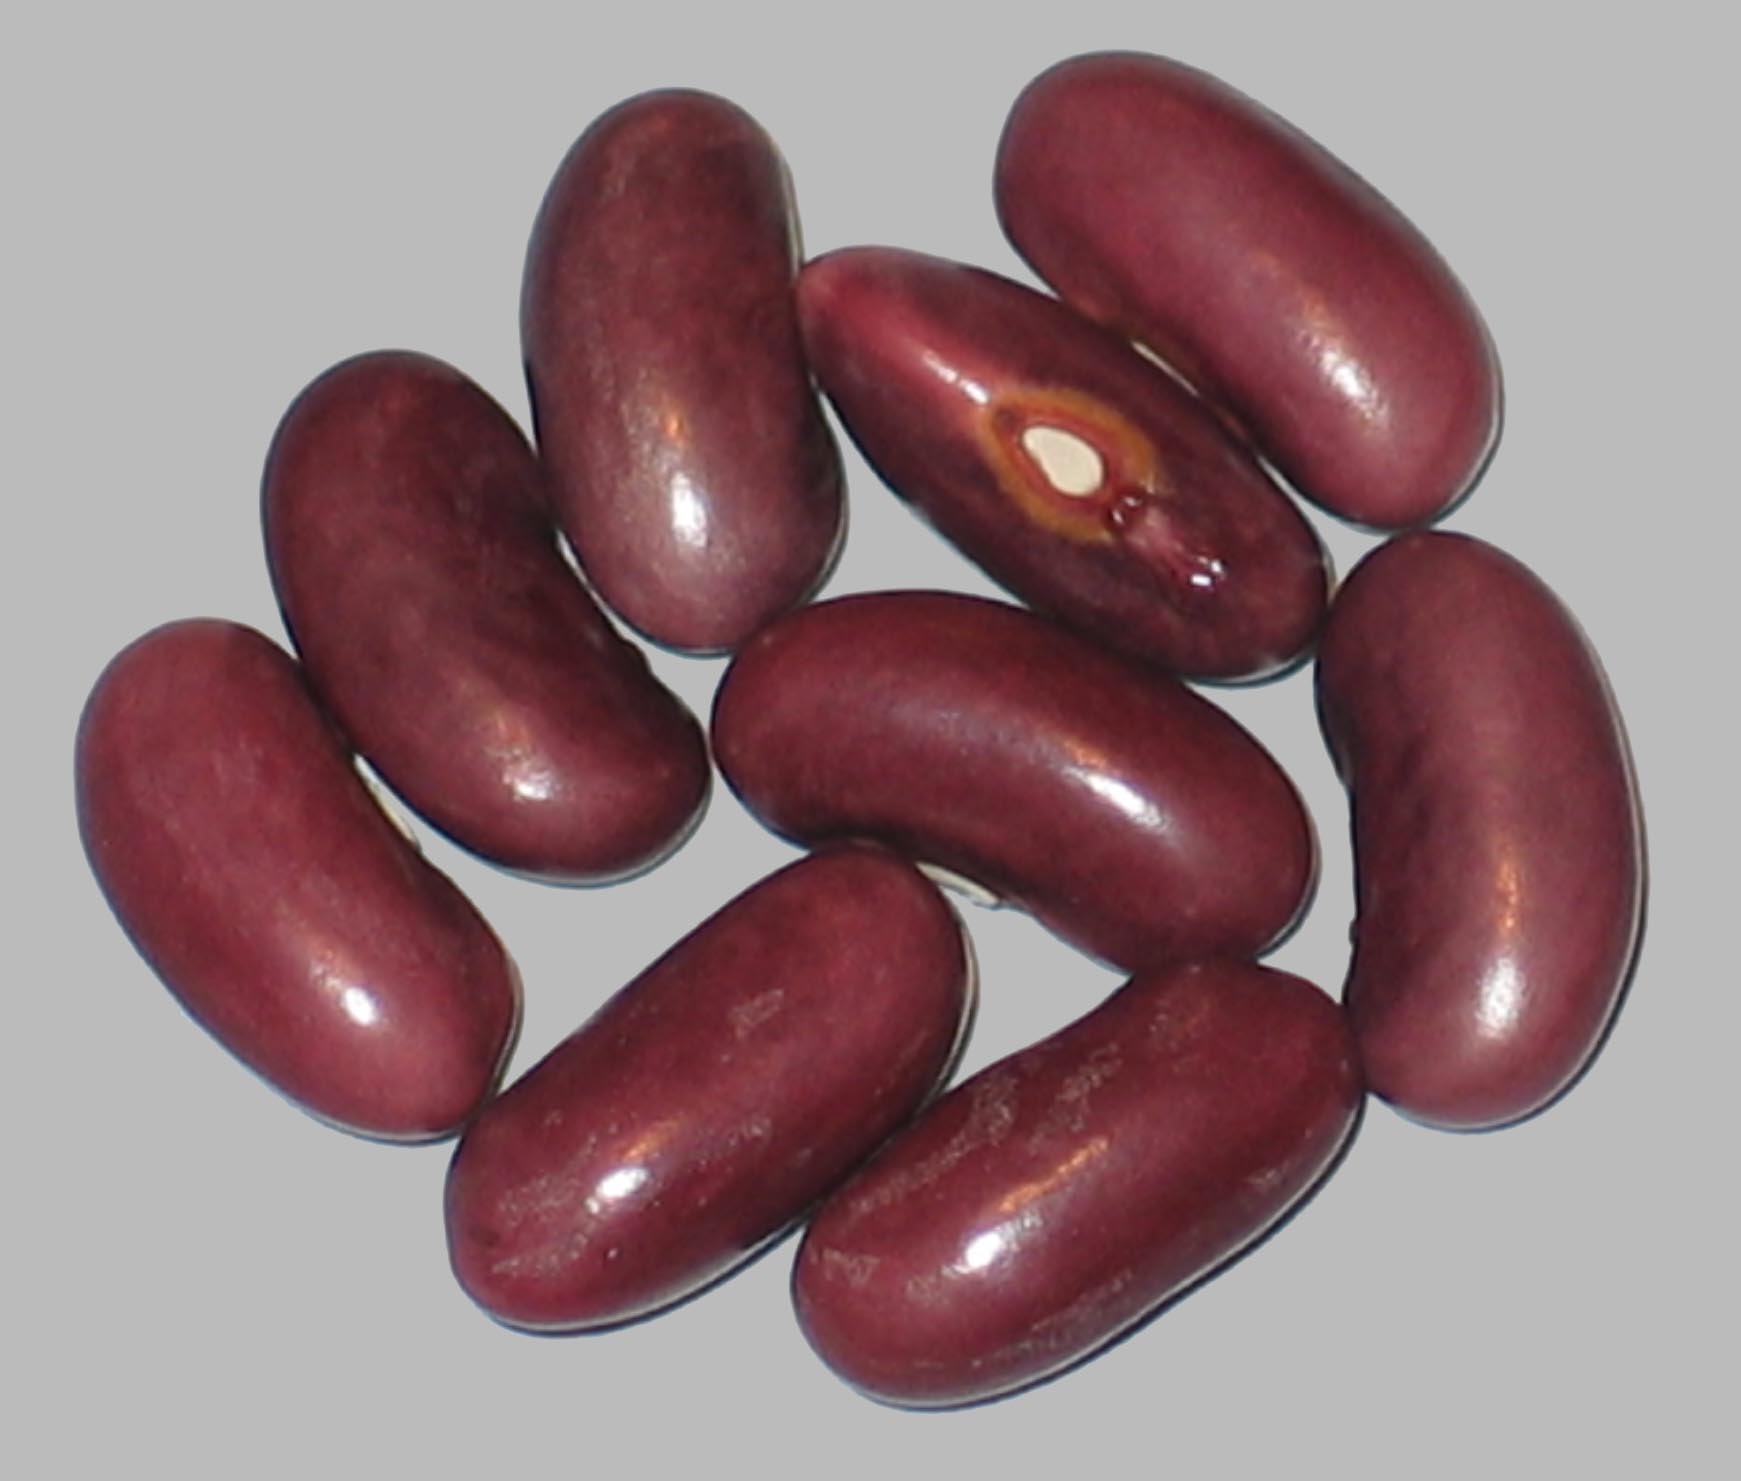 image of College Early beans